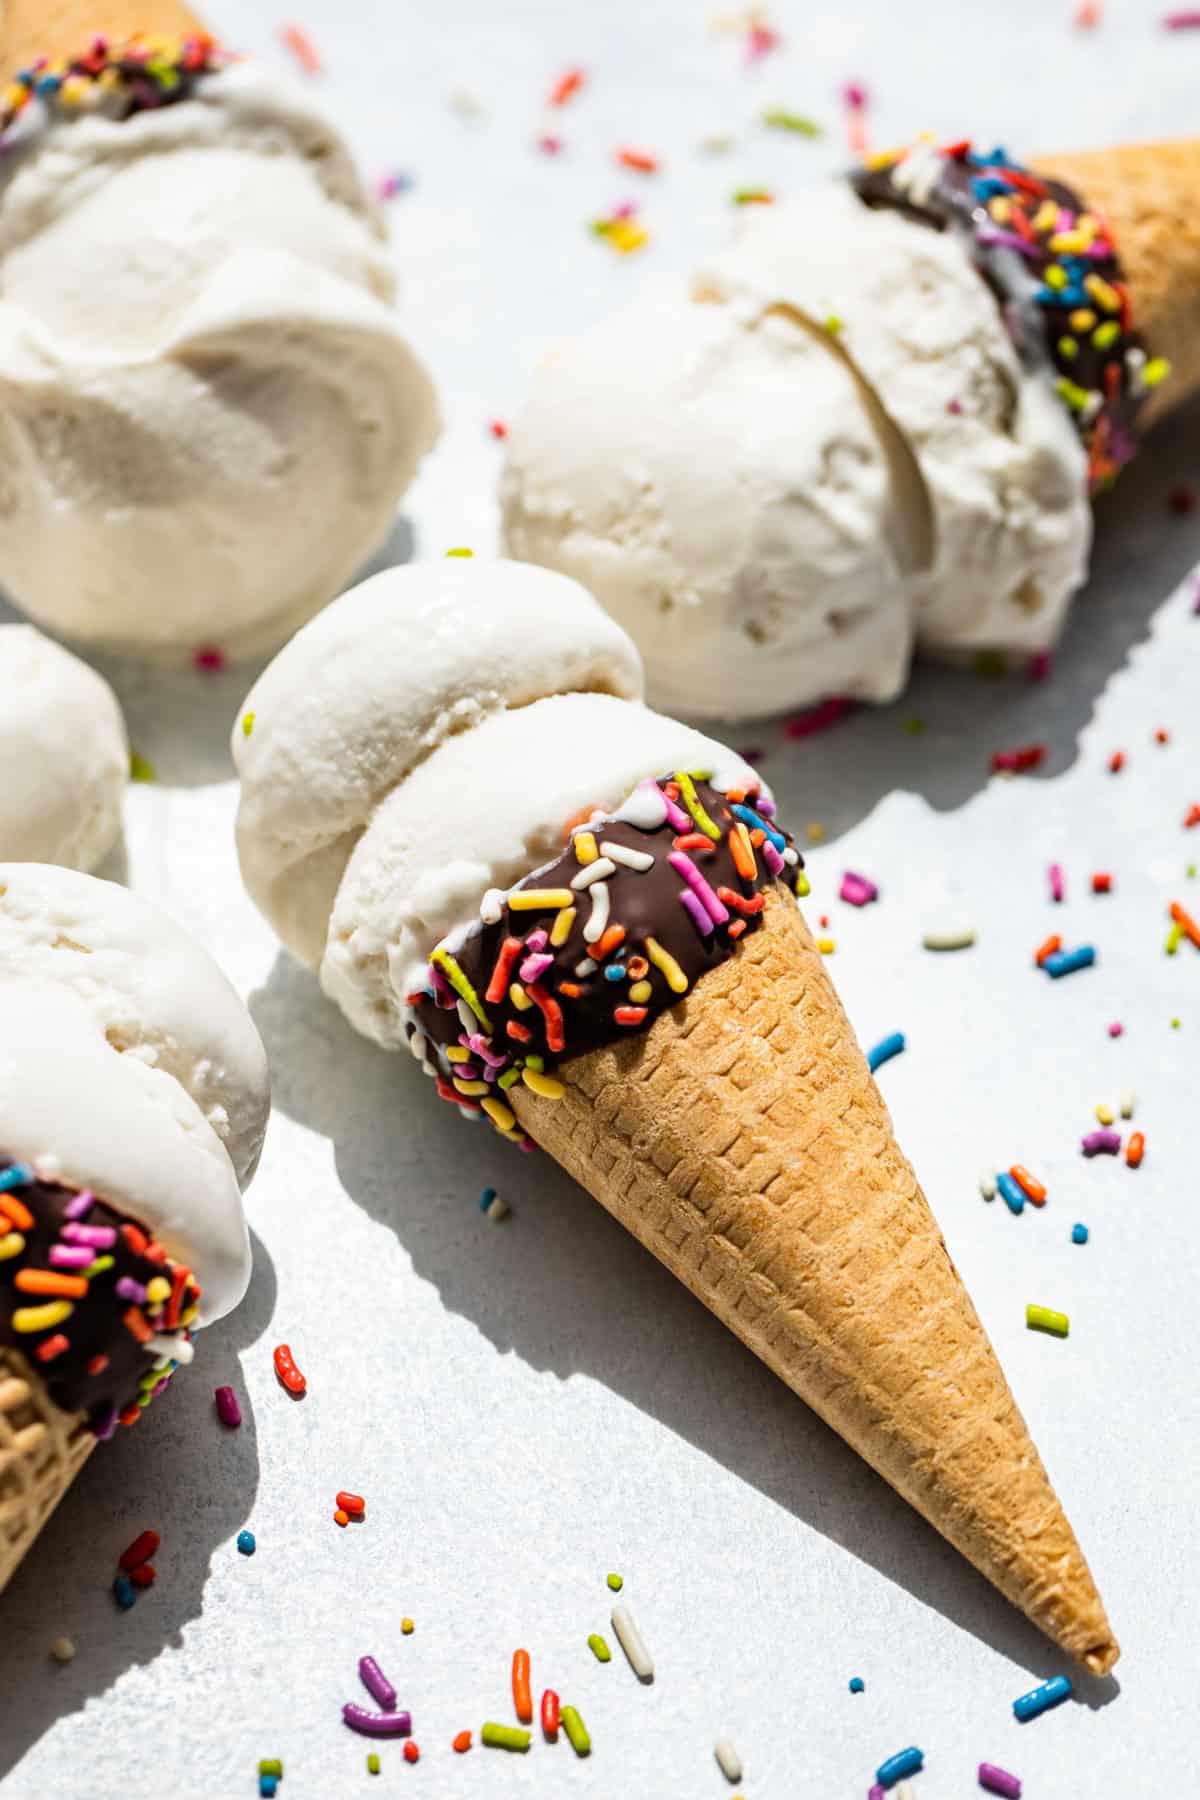 Coconut Ice Cream in chocolate dipped cones with sprinkles around them on a blue background.